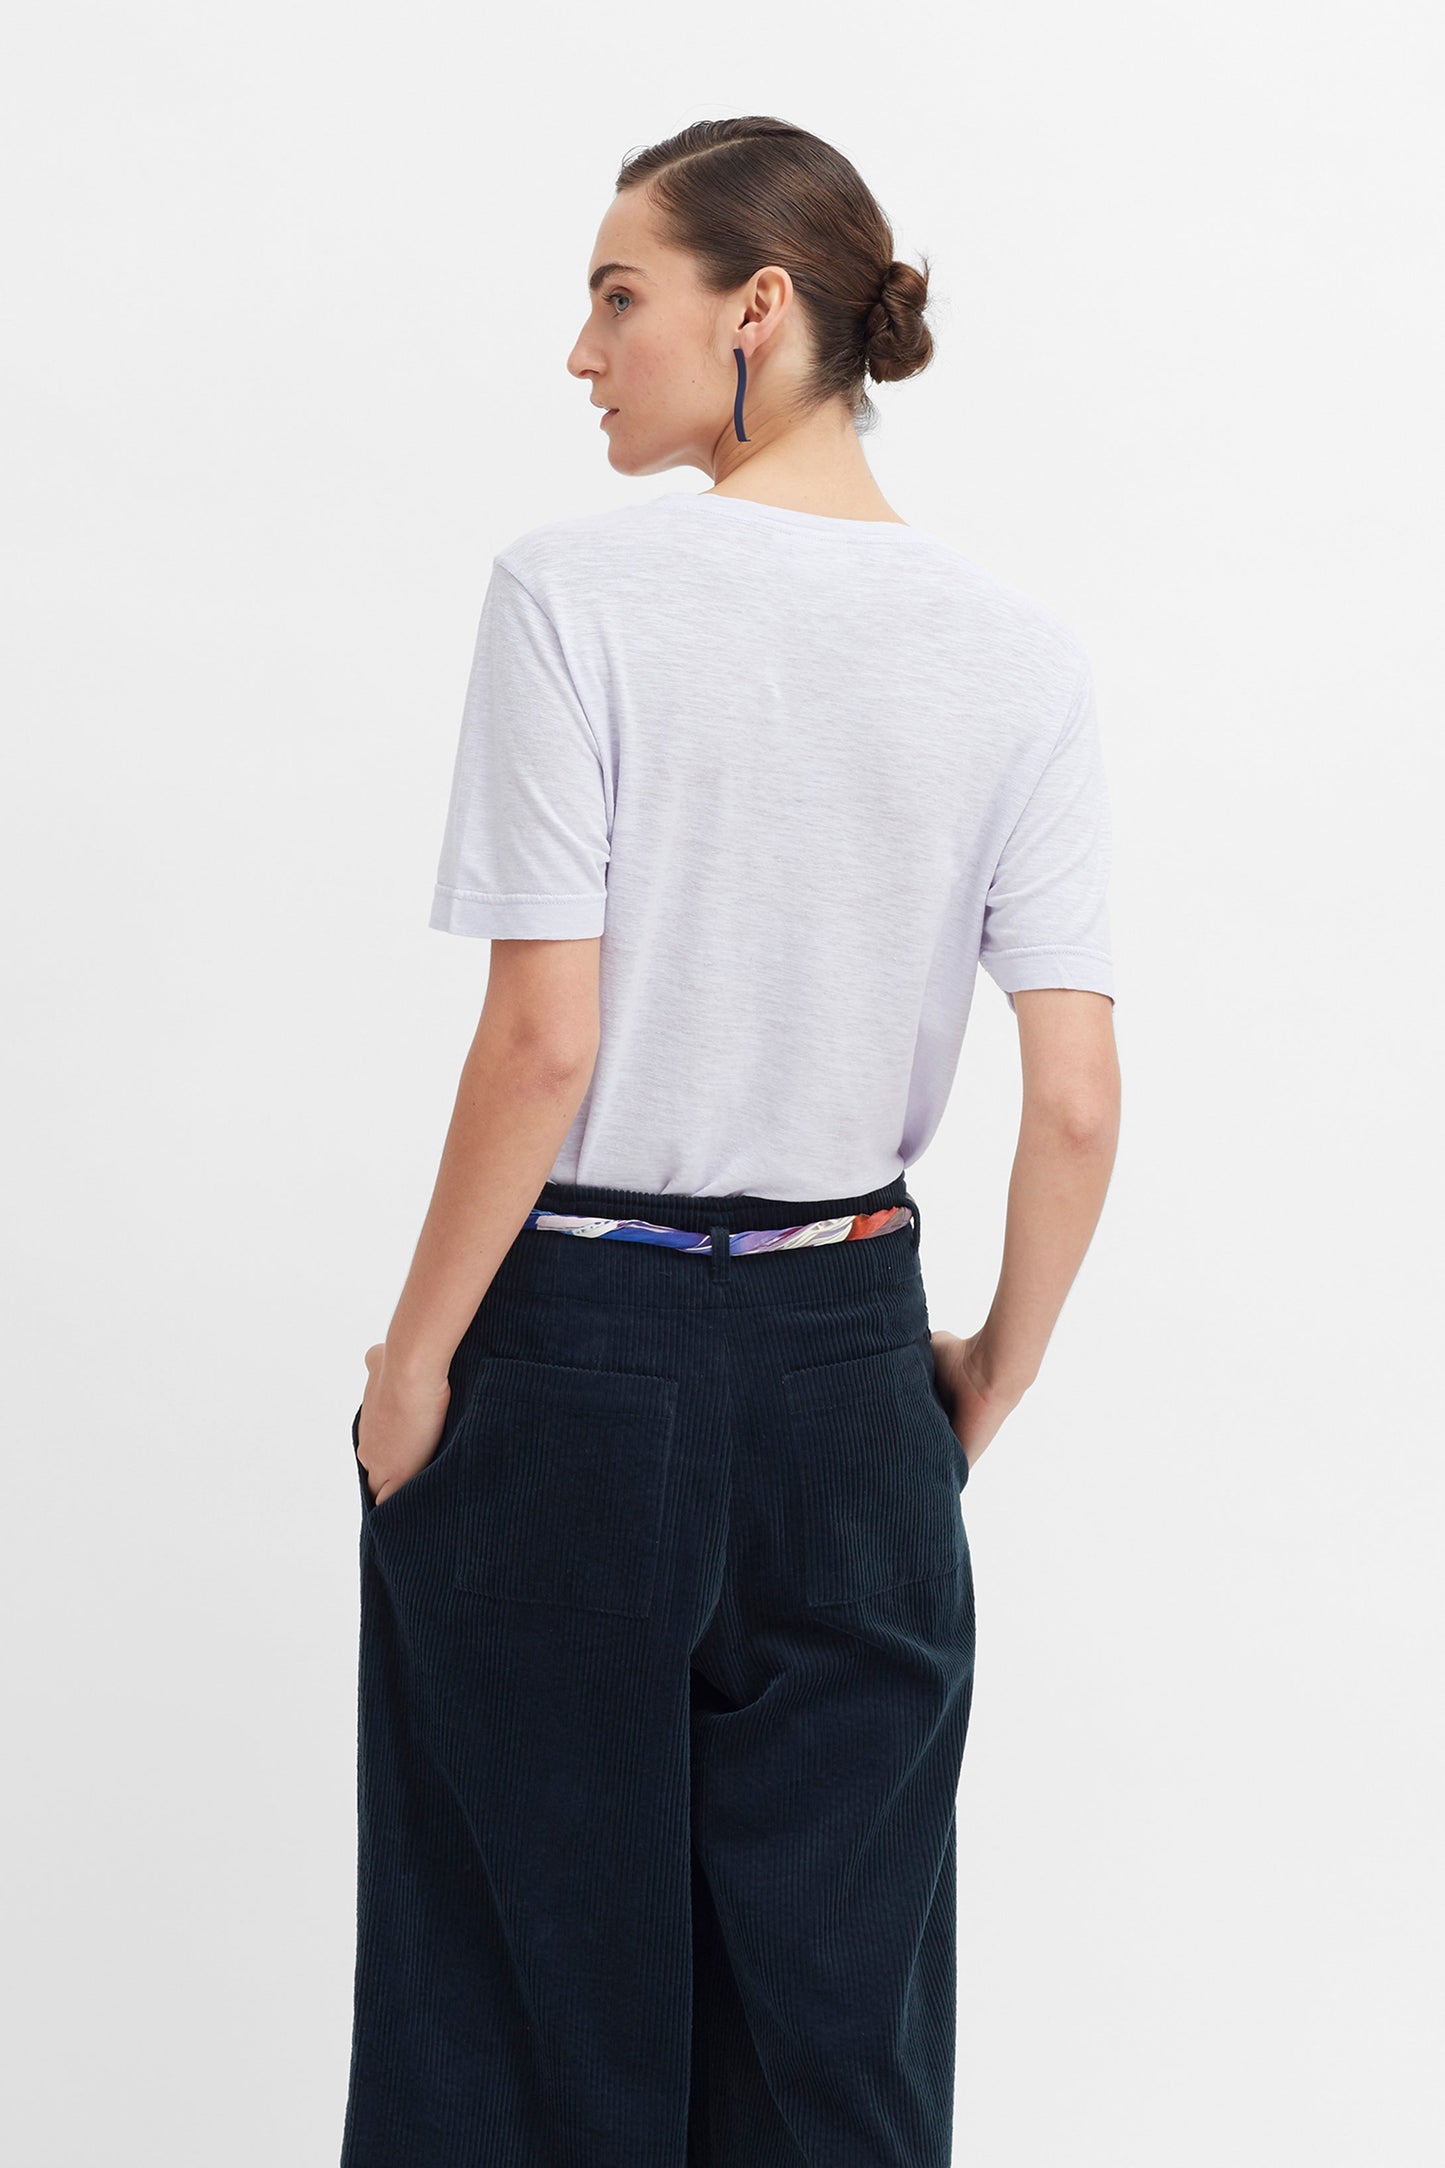 Ranell Sustainable Hemp and Organic Cotton V-Neck T Shirt Model Back Tucked In Crop | LILAC